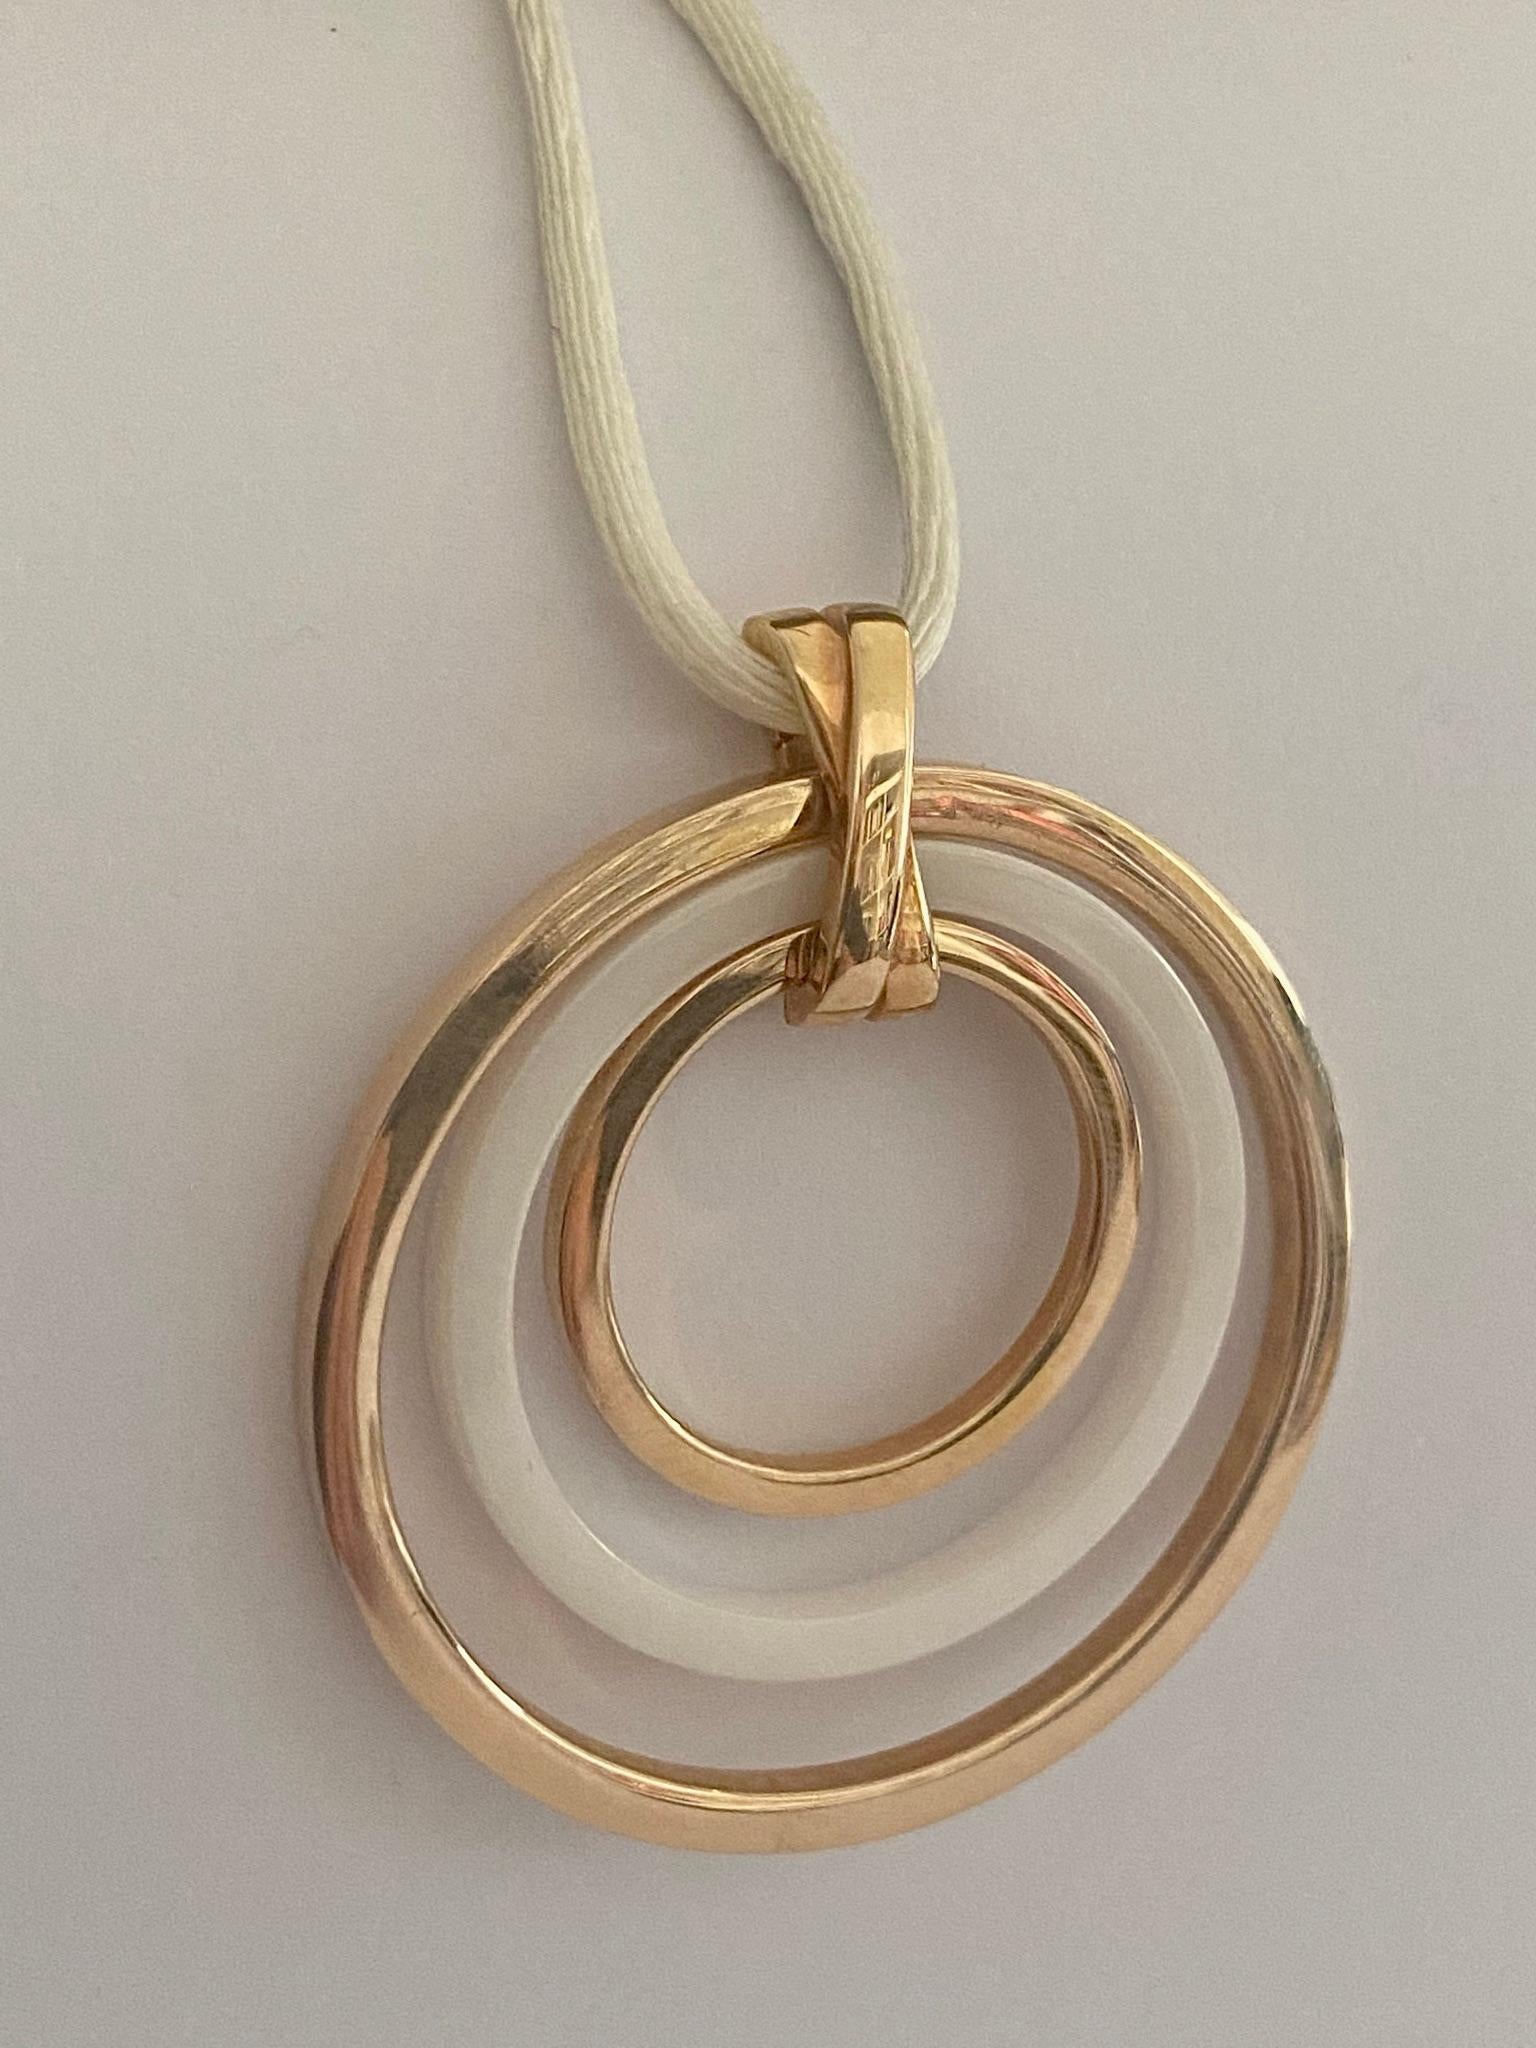 A 14K. rose gold pendant consisting of:
2 rose gold rings, 1 white cermic ring and a rose gold clip closure. A white silk necklace with a rose gold (14K) clasp.
Signed: Elaine Firenze = Italy.
Total weight: 11.58 grams
necklace length: 42 cm.
size